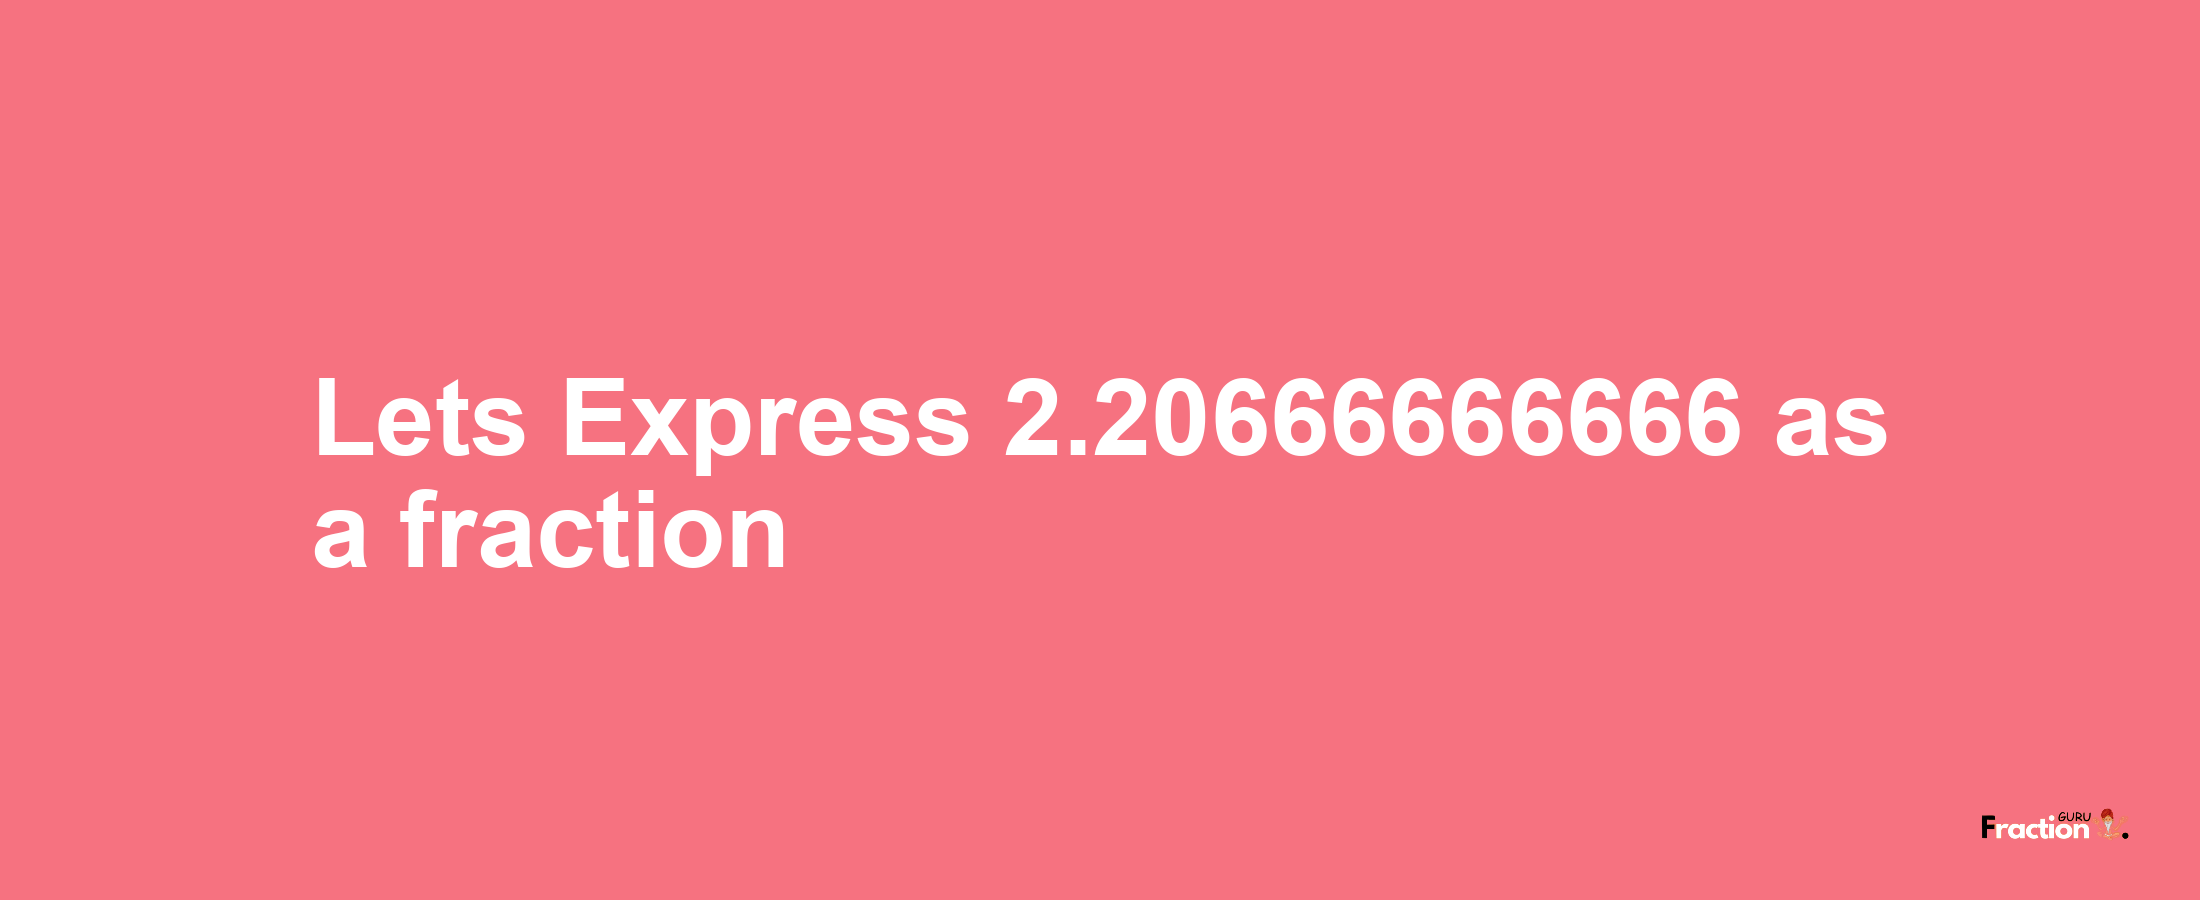 Lets Express 2.20666666666 as afraction